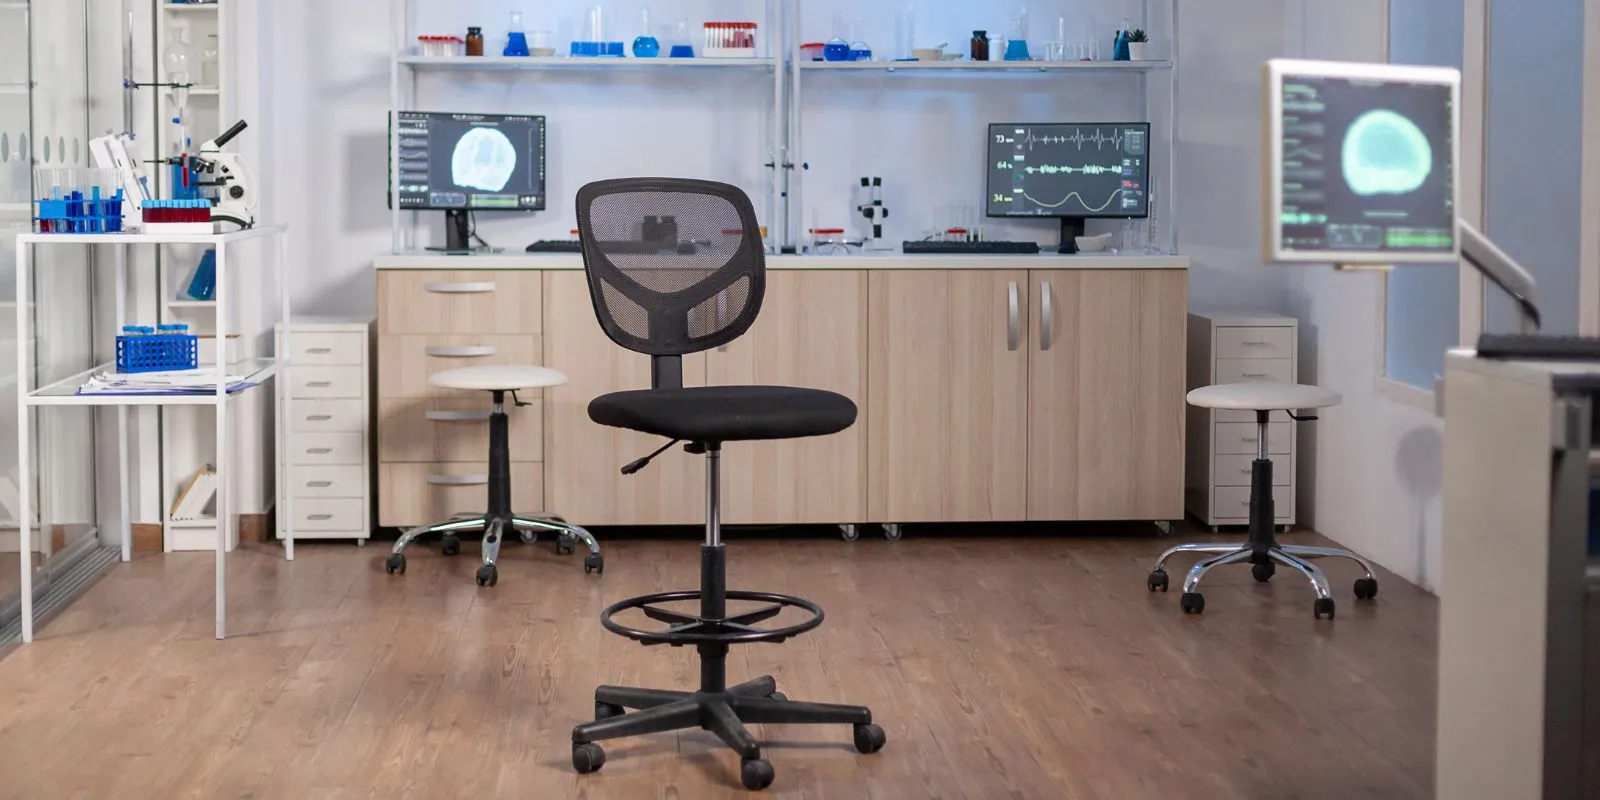 7 Advantages Of Using Modular Laboratory Furniture In Educational Institutions